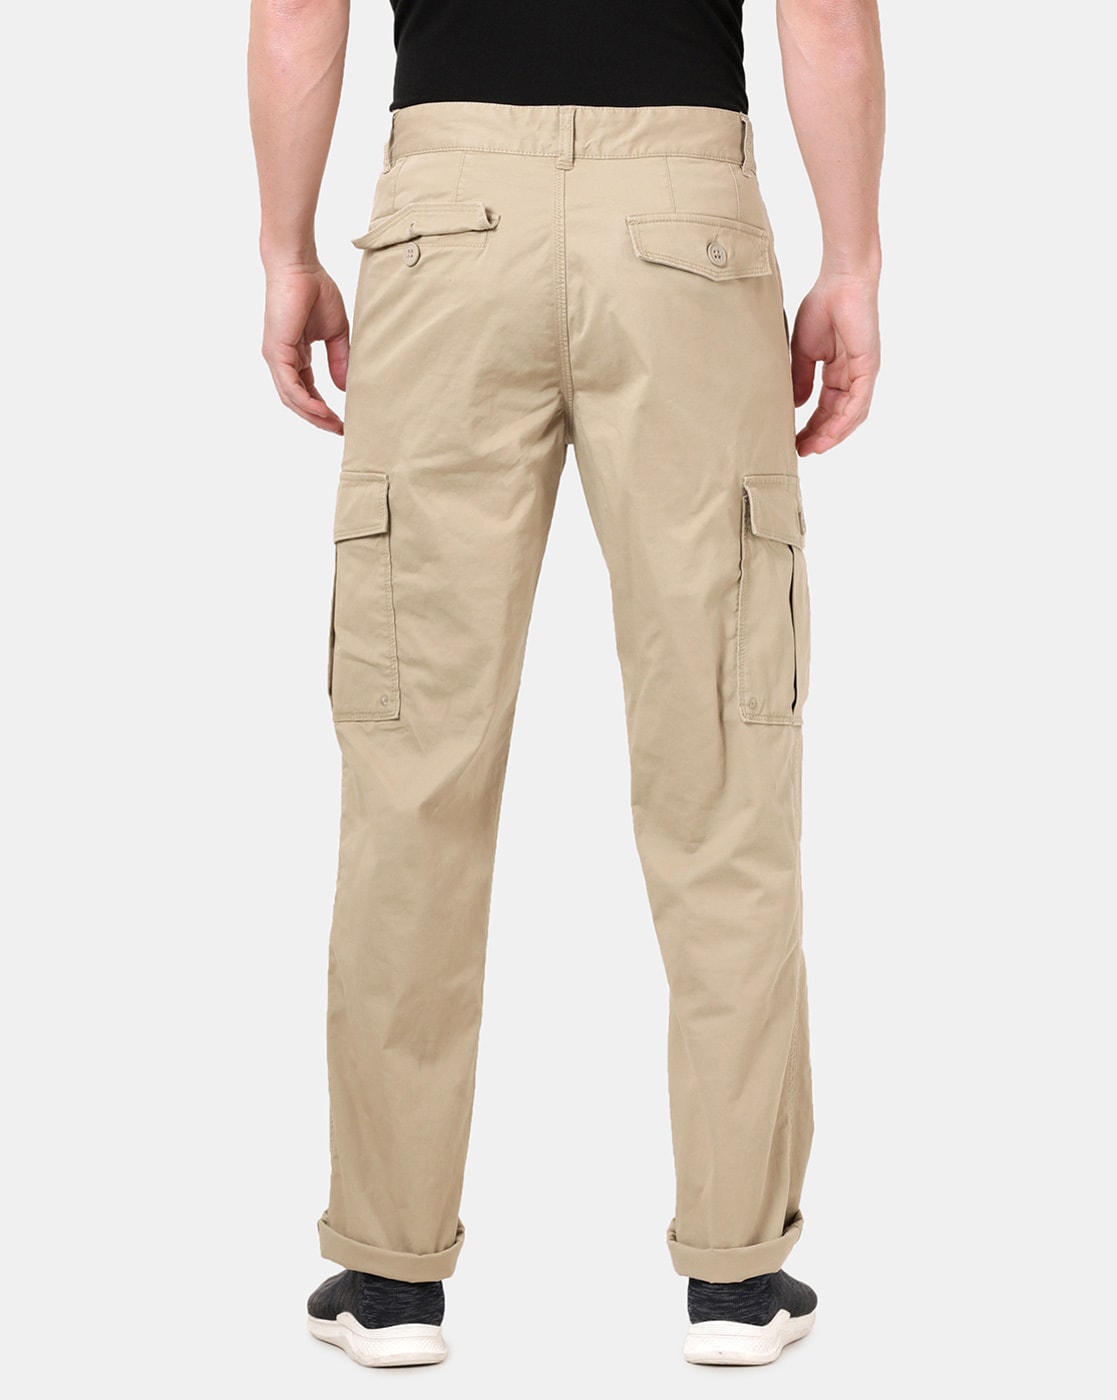 Beige Cargo Pants Mid Rise | Ally Fashion